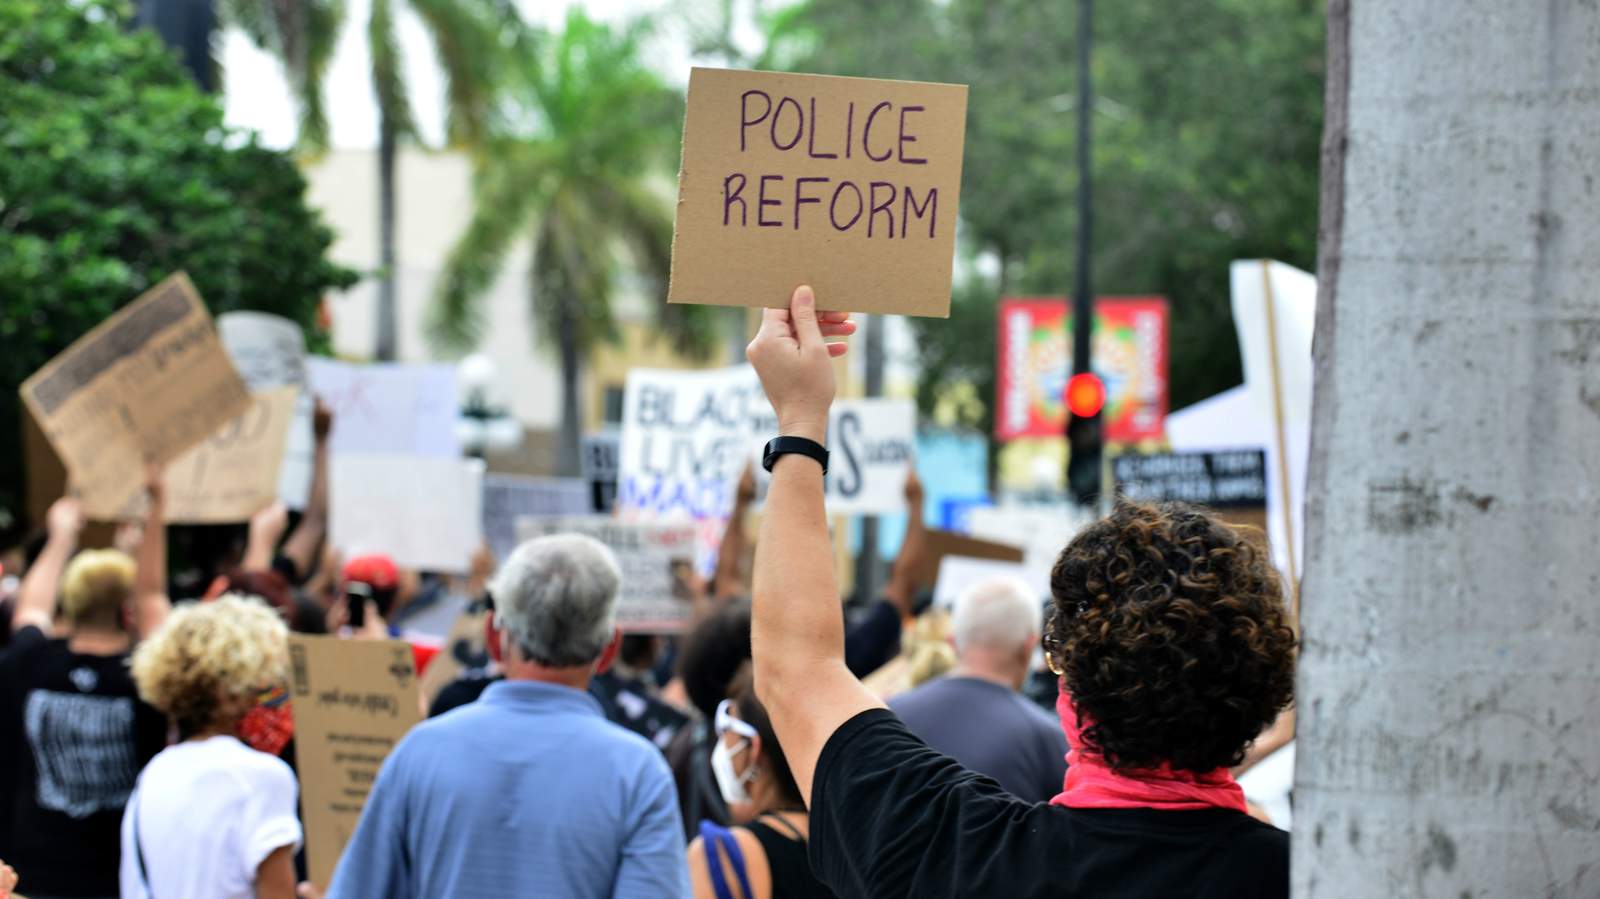 Examining police reform: Does it work?